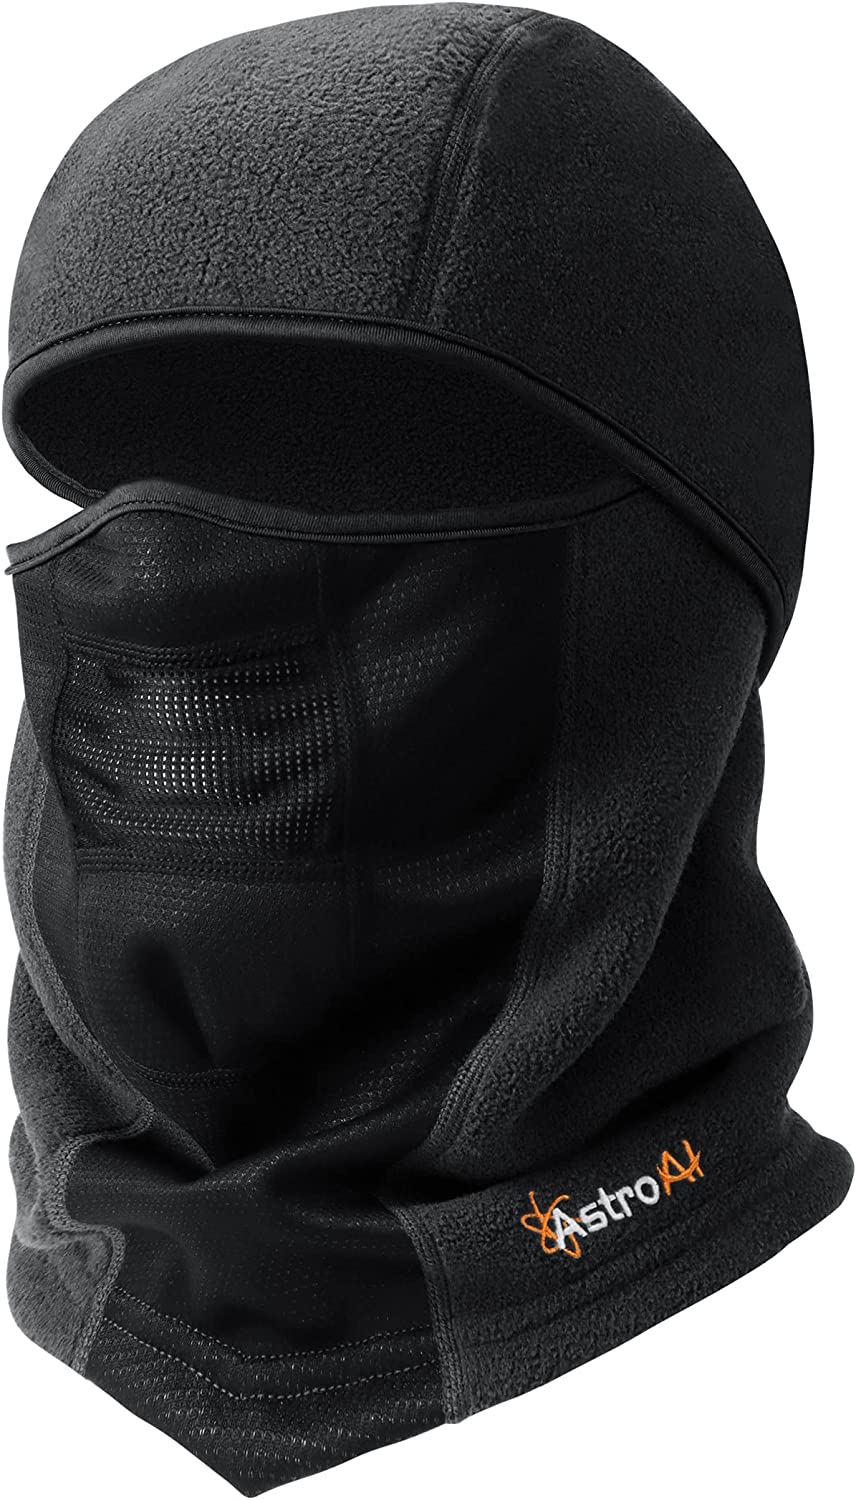 AstroAI Balaclava Ski Mask Winter Fleece Thermal Face Mask Cover for Men Women Warmer Windproof Breathable, Cold Weather Gear for Skiing, Outdoor Work, Riding Motorcycle & Snowboarding, Black